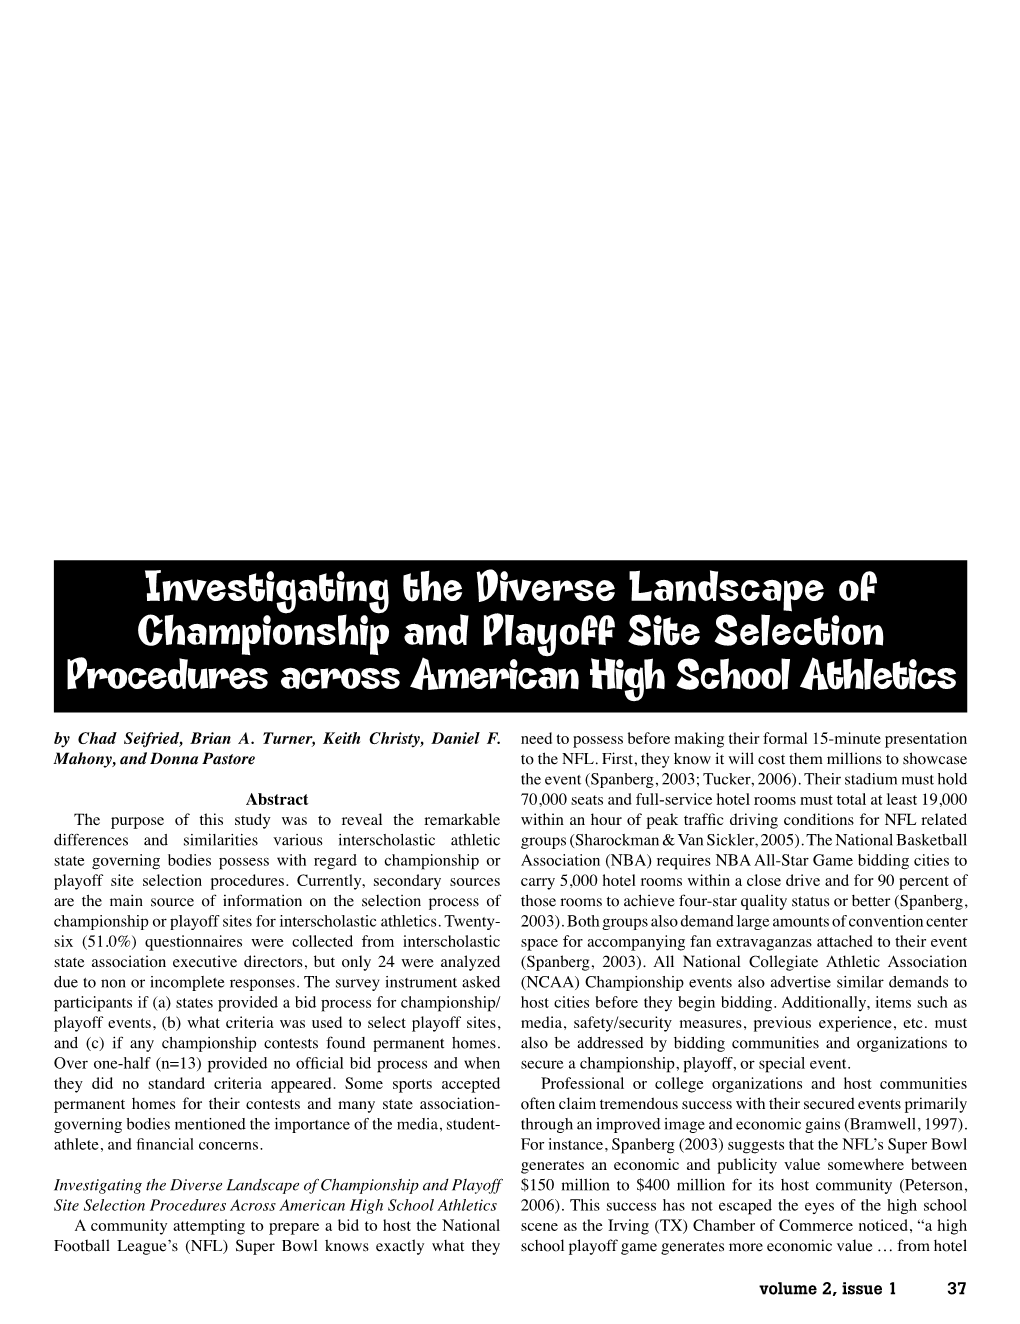 Investigating the Diverse Landscape of Championship and Playoff Site Selection Procedures Across American High School Athletics by Chad Seifried, Brian A